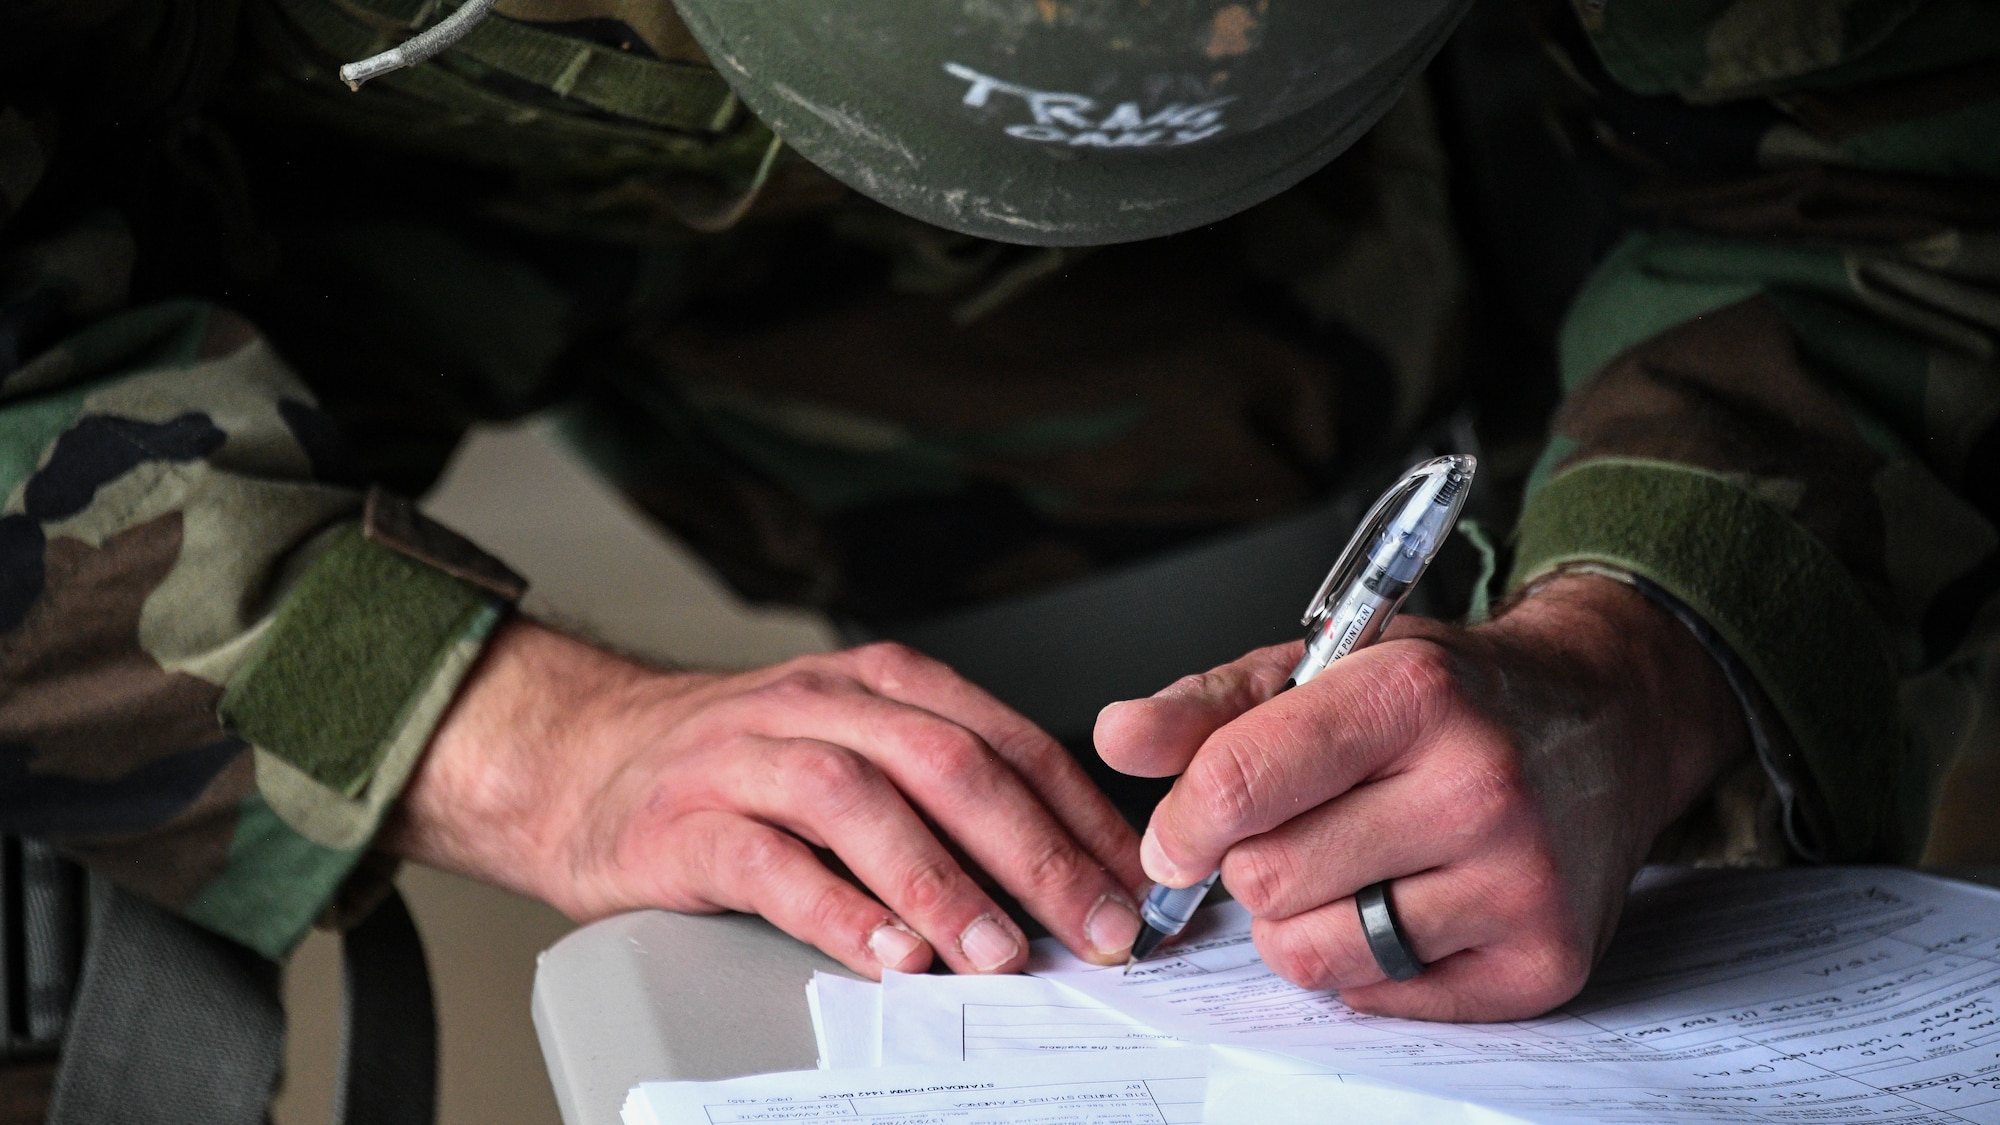 An Airman fills out paperwork during a Contracting Directorate field exercise at Hill Air Force Base, Utah, May 22, 2019. The exercise simulated scenarios specific to the contracting mission in a deployed environment. Contracting specialists purchase supplies and services essential to operational continiuty and mission success. (U.S. Air Force photo by R. Nial Bradshaw)